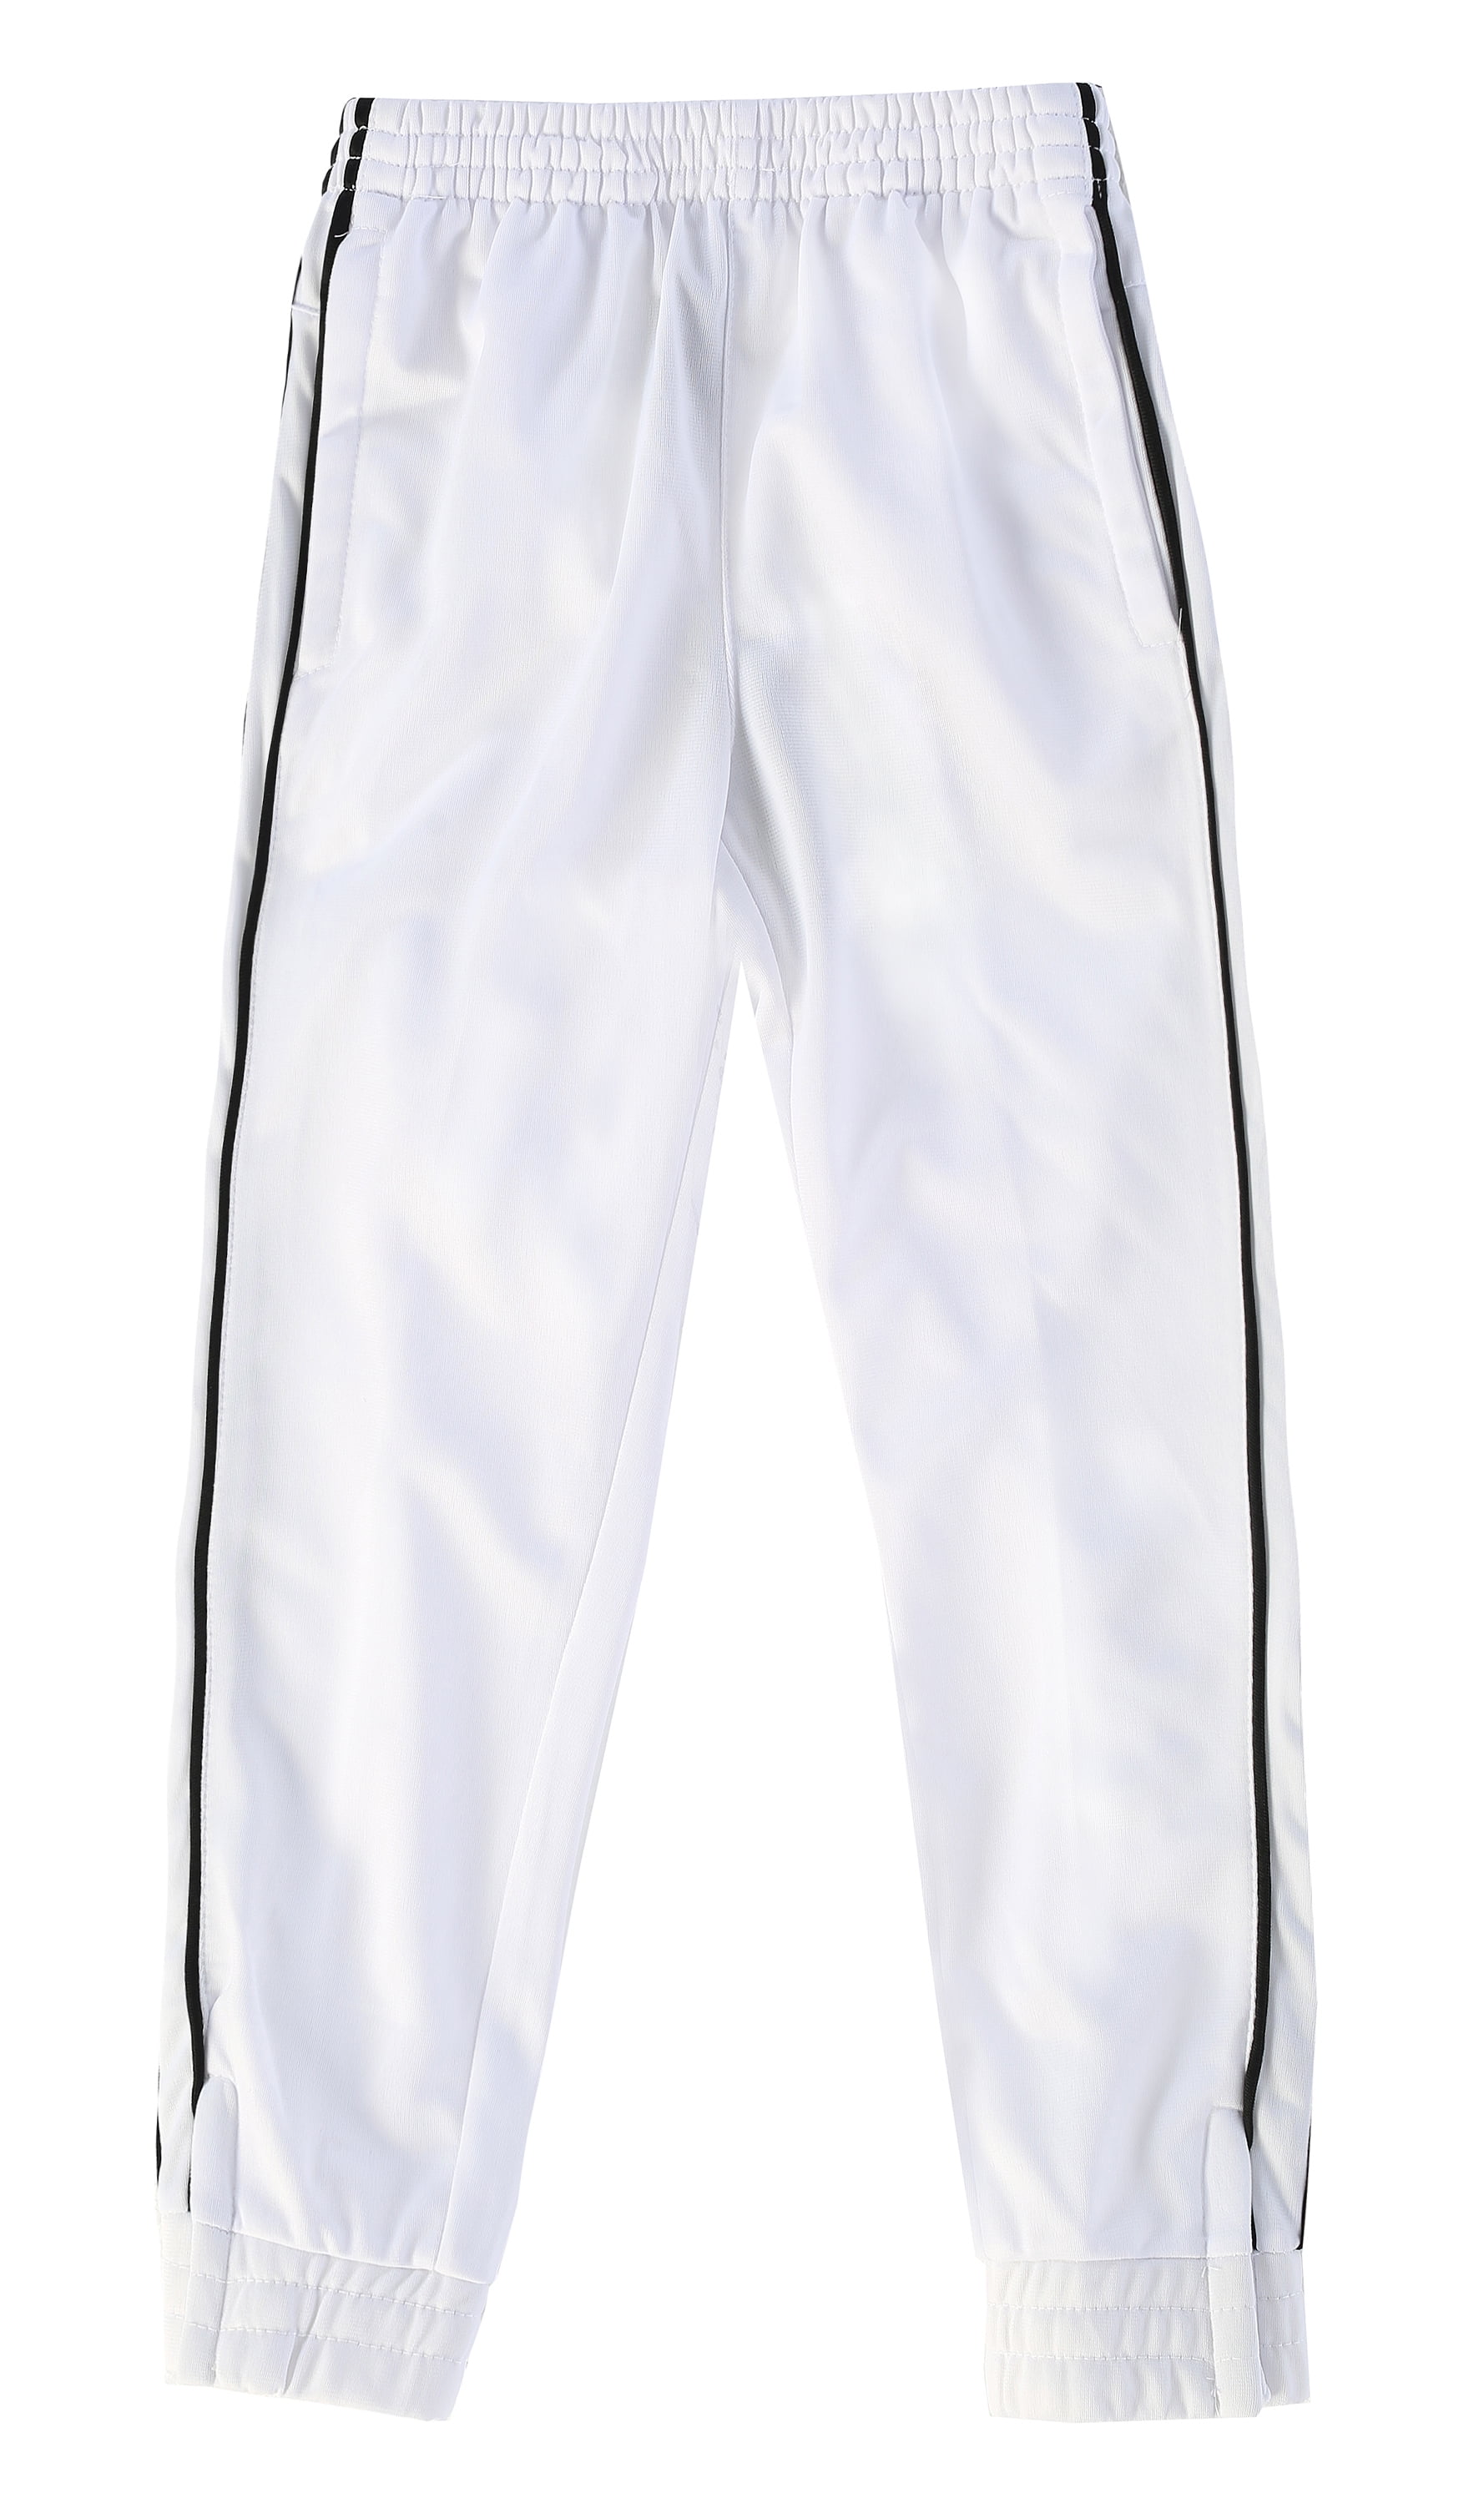 TORY SPORT Wool-blend tapered track pants | NET-A-PORTER